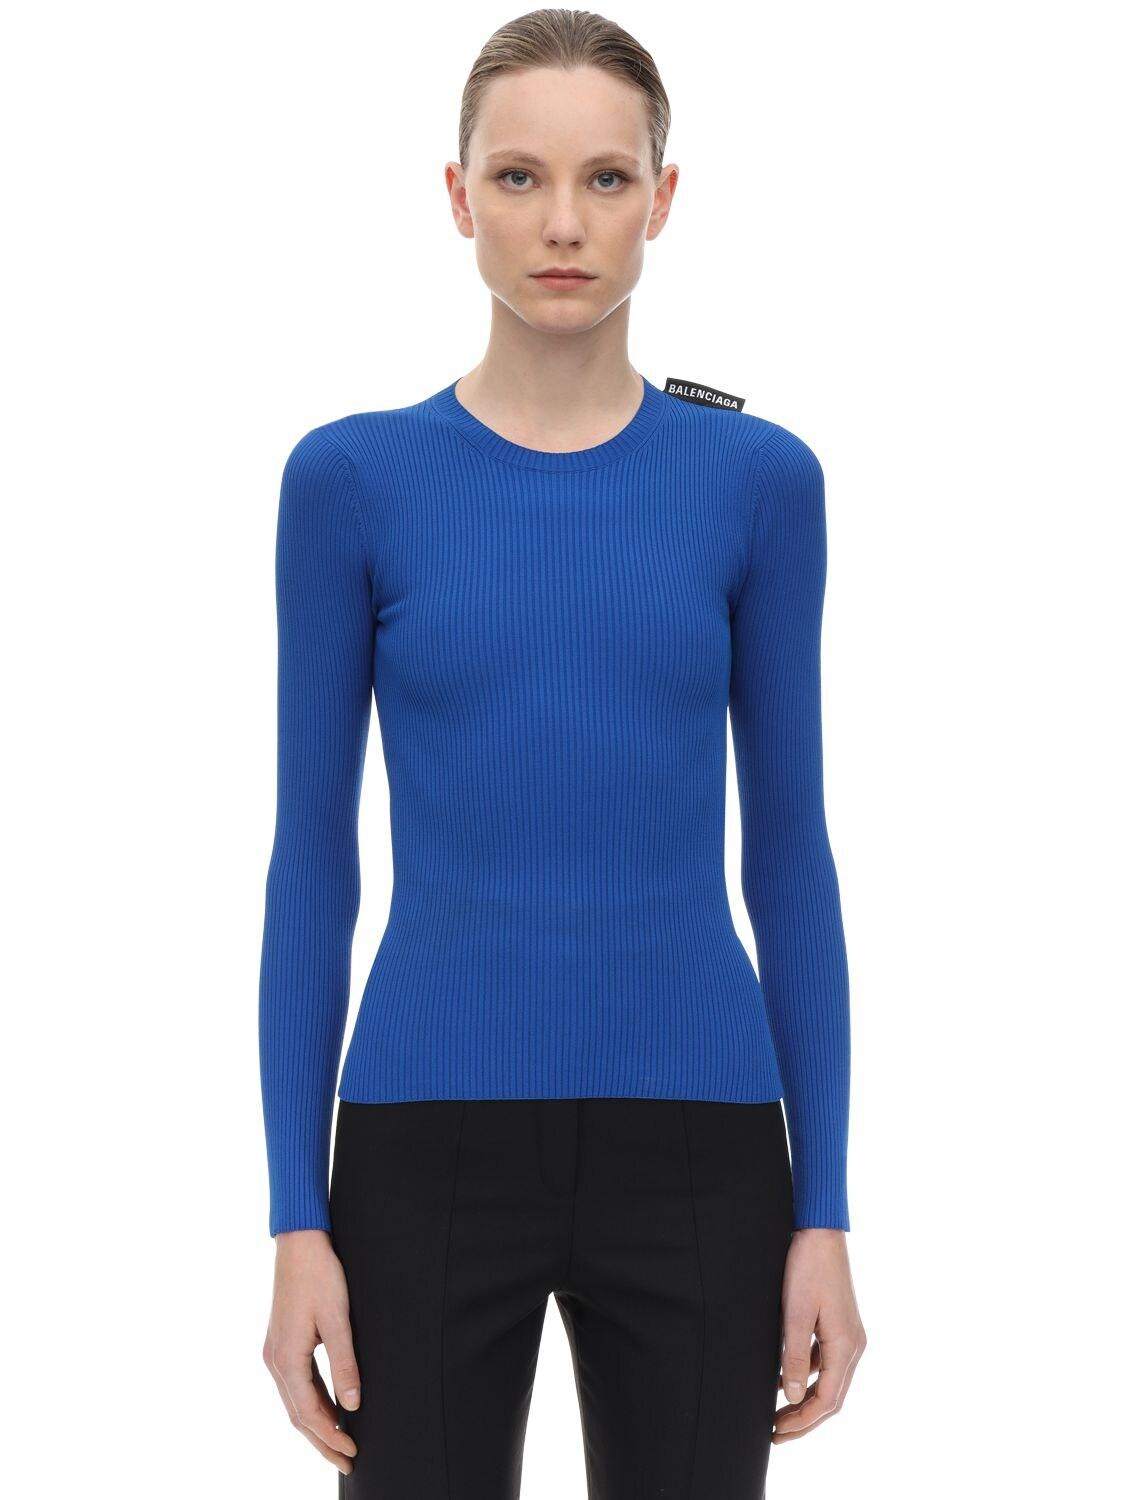 Balenciaga Synthetic Viscose Blend Rib Knit Sweater in Blue - Lyst